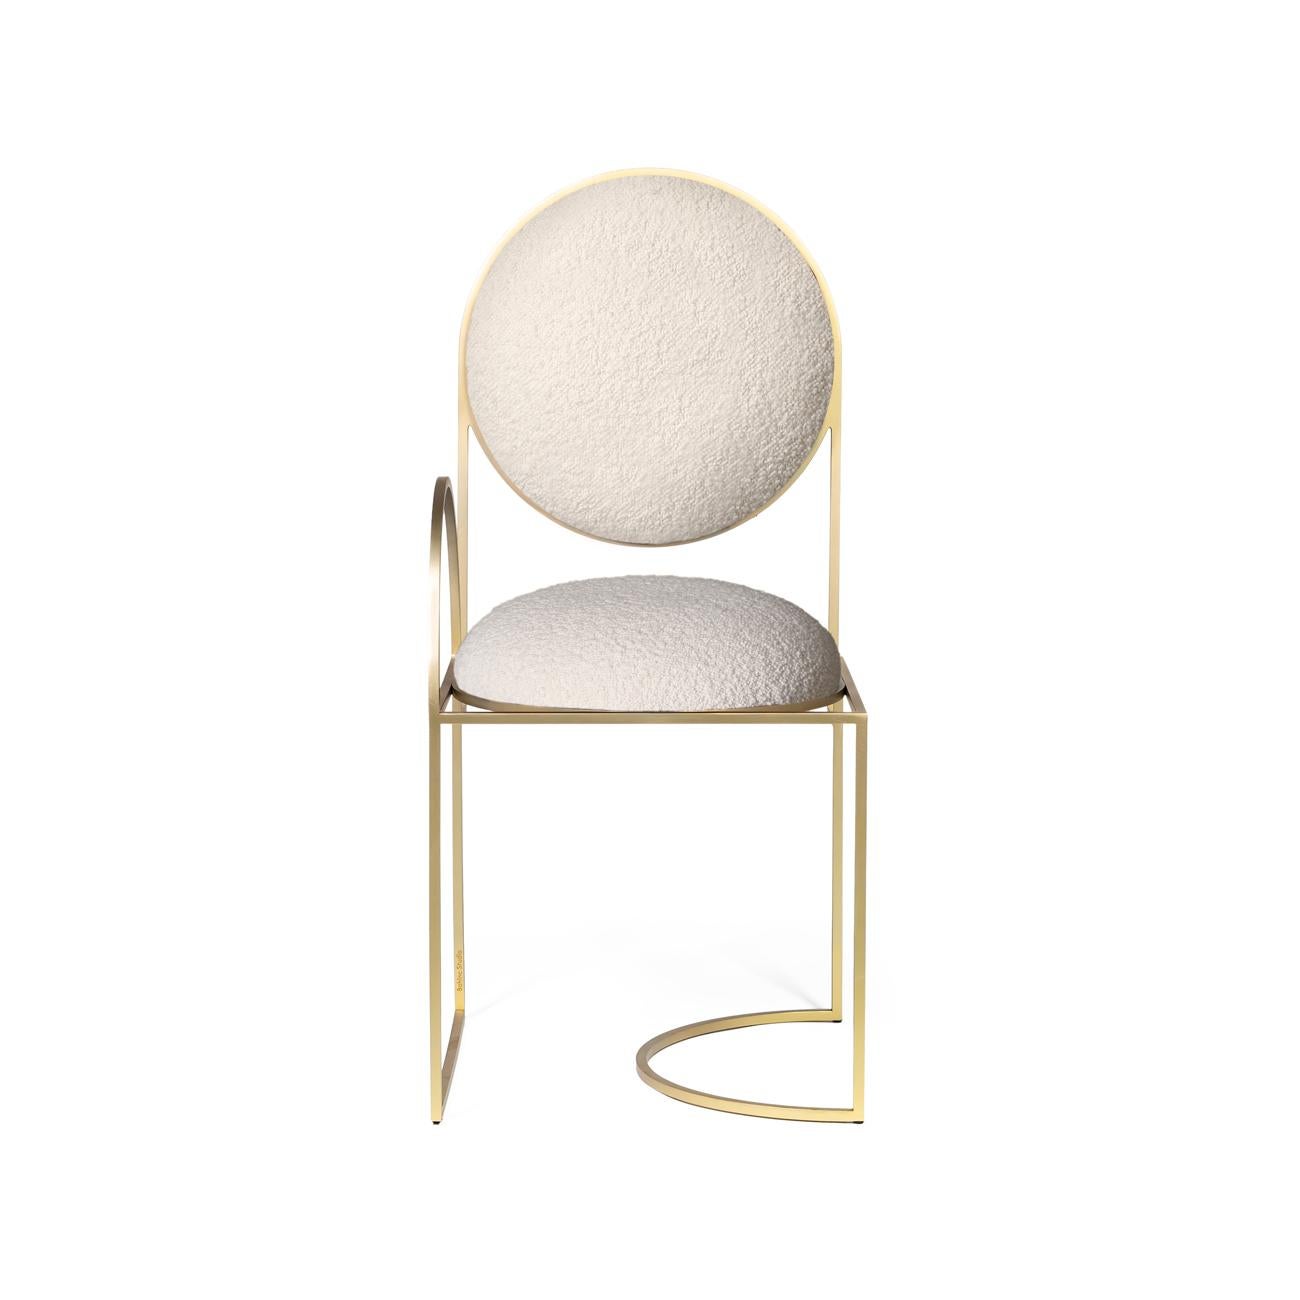 Modern Solar Chair, Cream Boucle Wool Fabric and Brushed Brass Frame, by Lara Bohinc For Sale